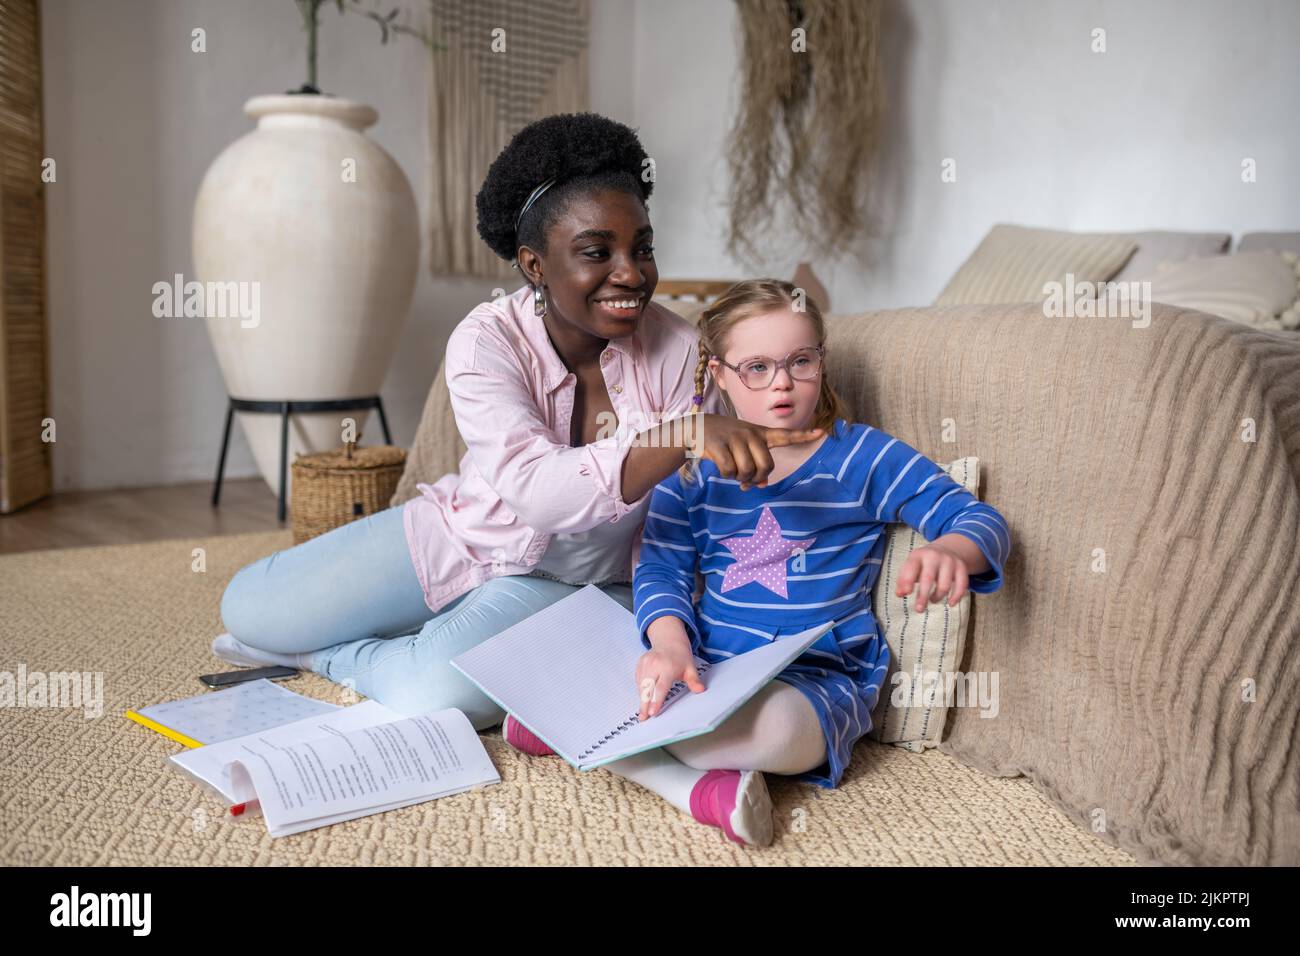 A girl with down syndrome reading something with her teacher Stock Photo